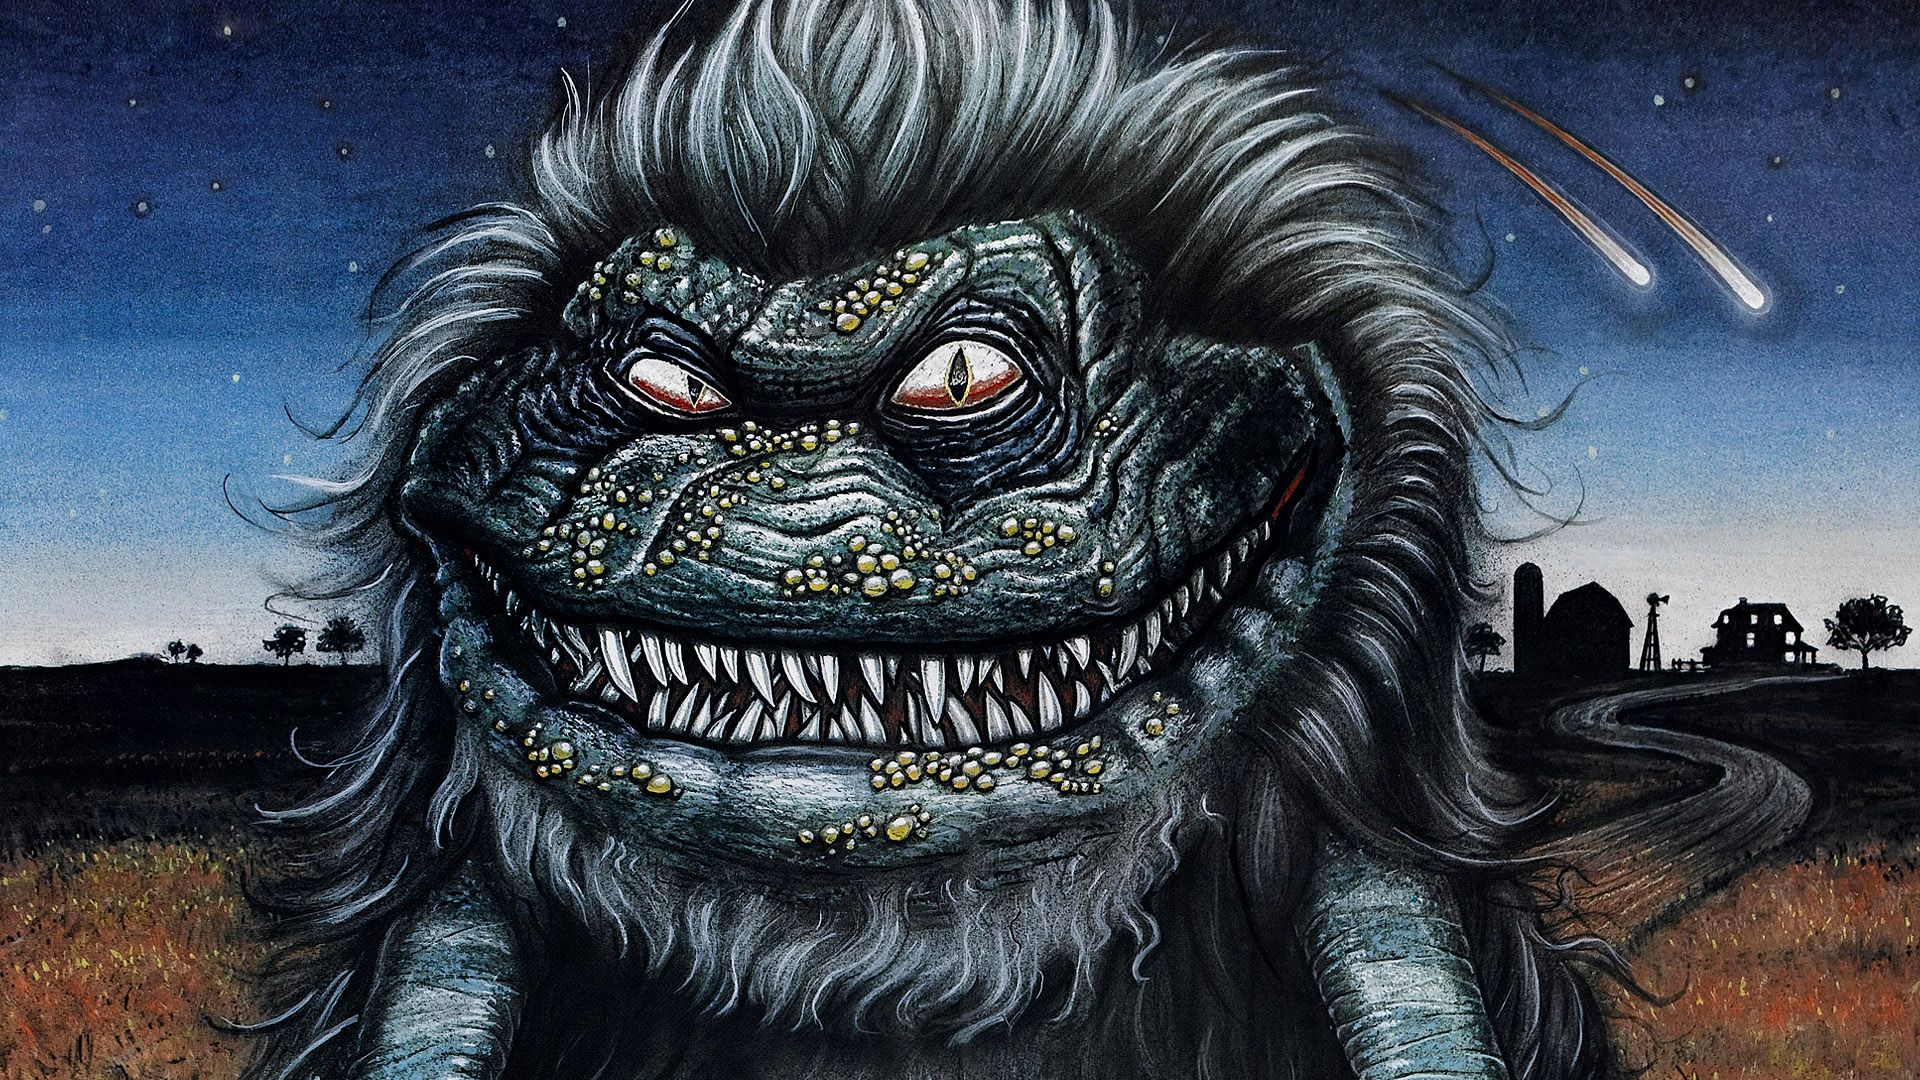 Critters background